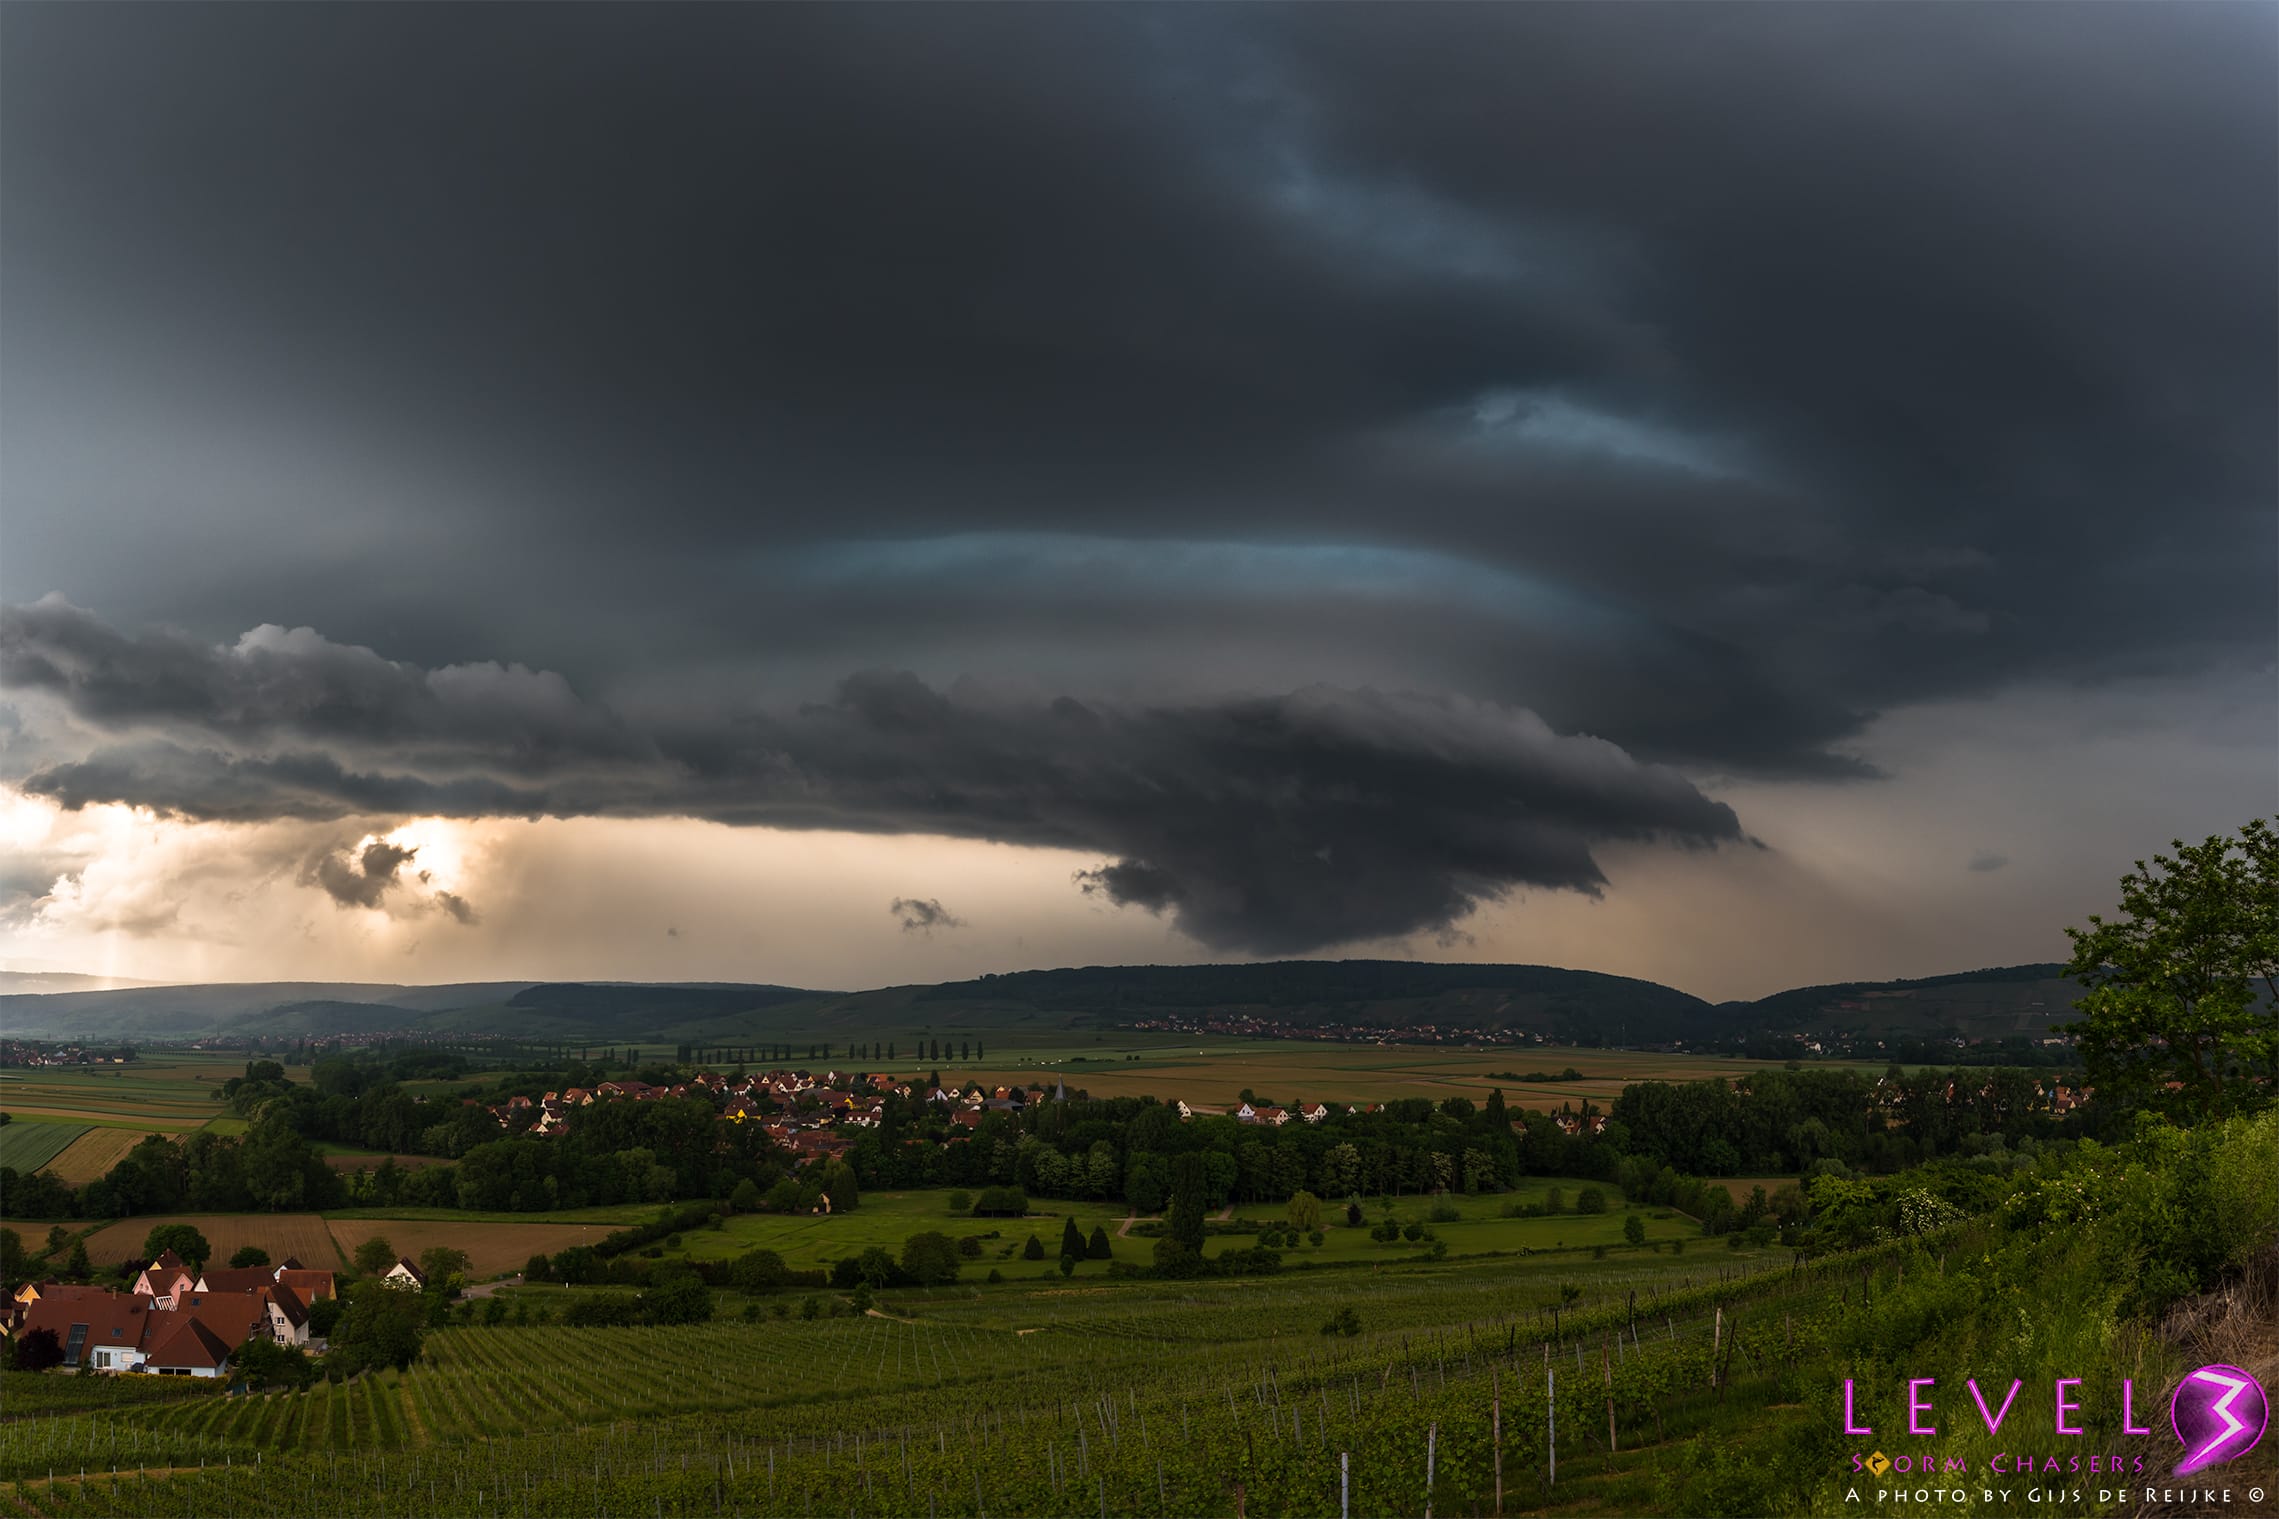 The 'Strasbourg Supercell' with a well-developed wall cloud - 28/05/2016 20:30 - Gijs de Reijke